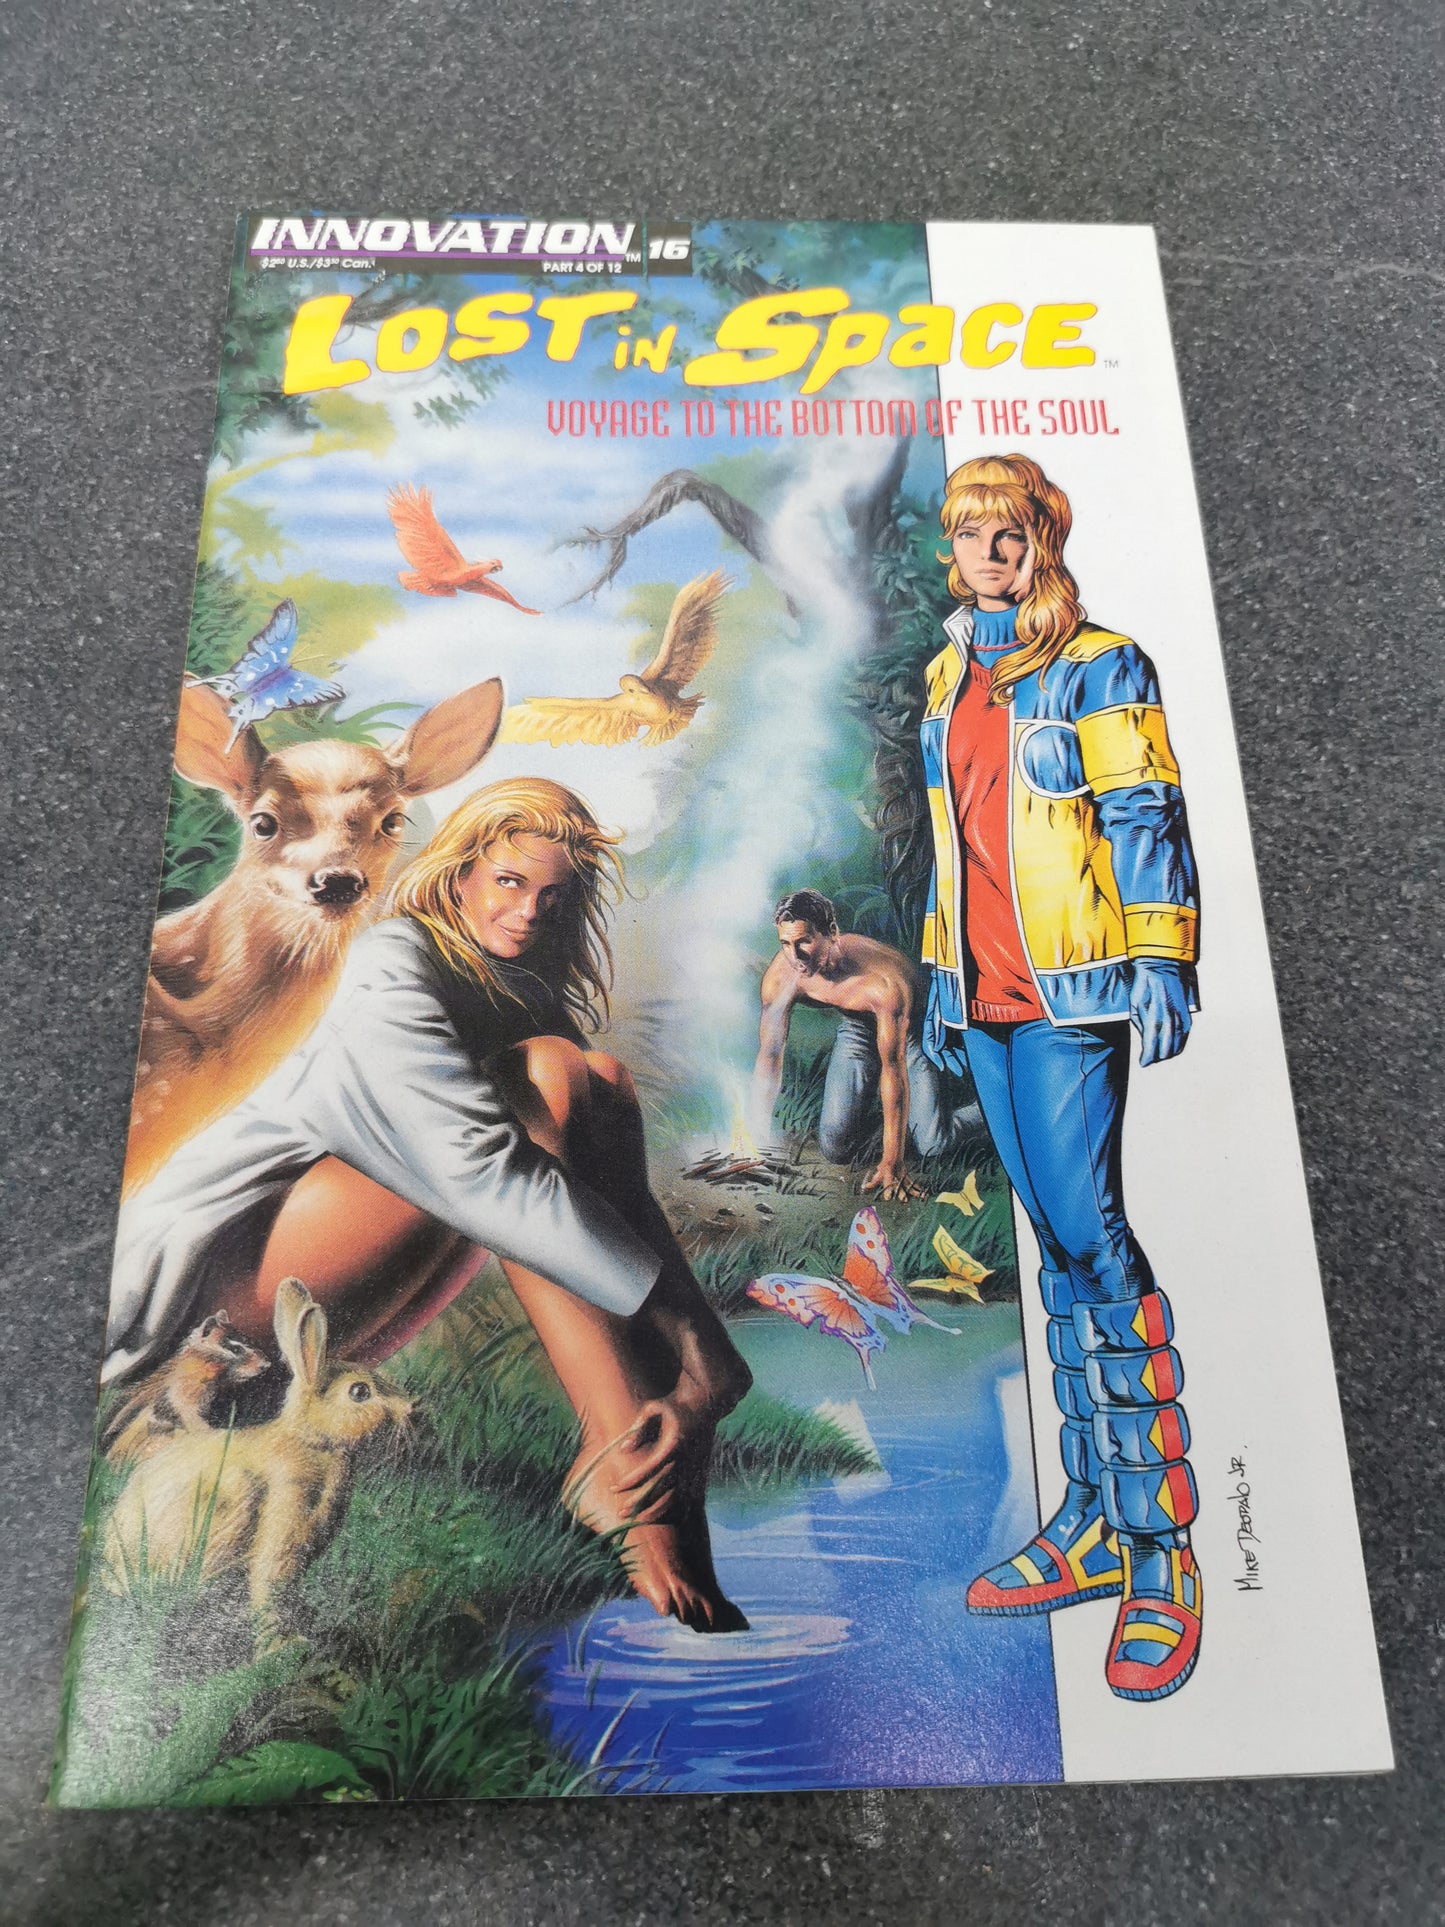 Lost In Space #16 1993 Innovation comic Sci-fi